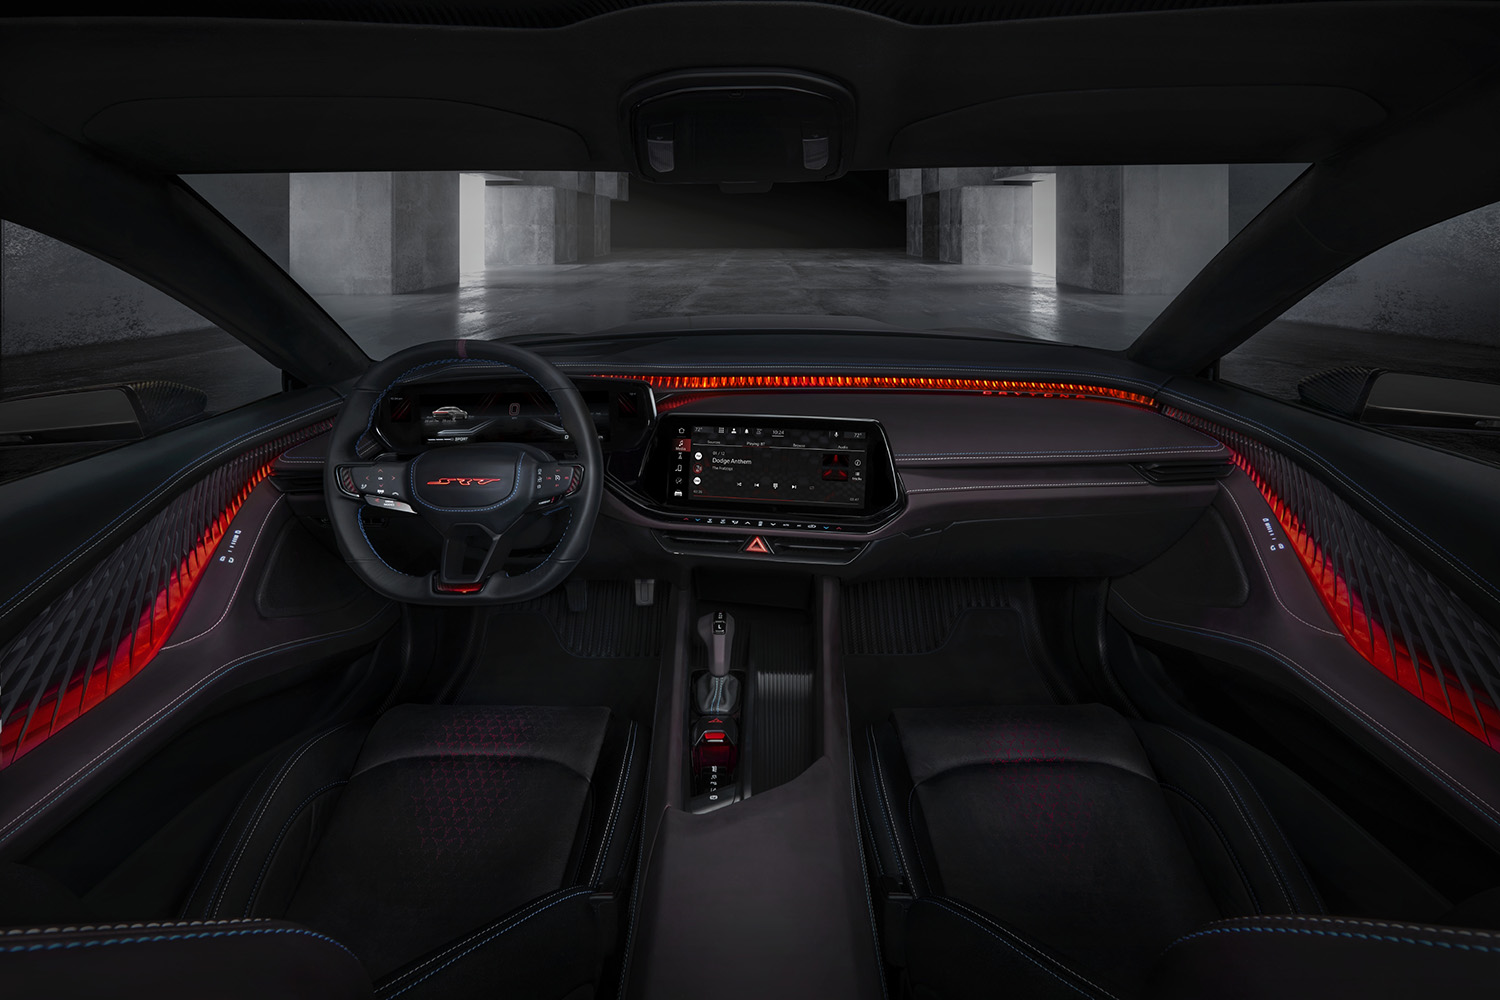 The Dodge Charger Daytona SRT Concept’s interior is modern, lightweight and athletic, providing a driver-centric cockpit with all essentials cohesively packaged.